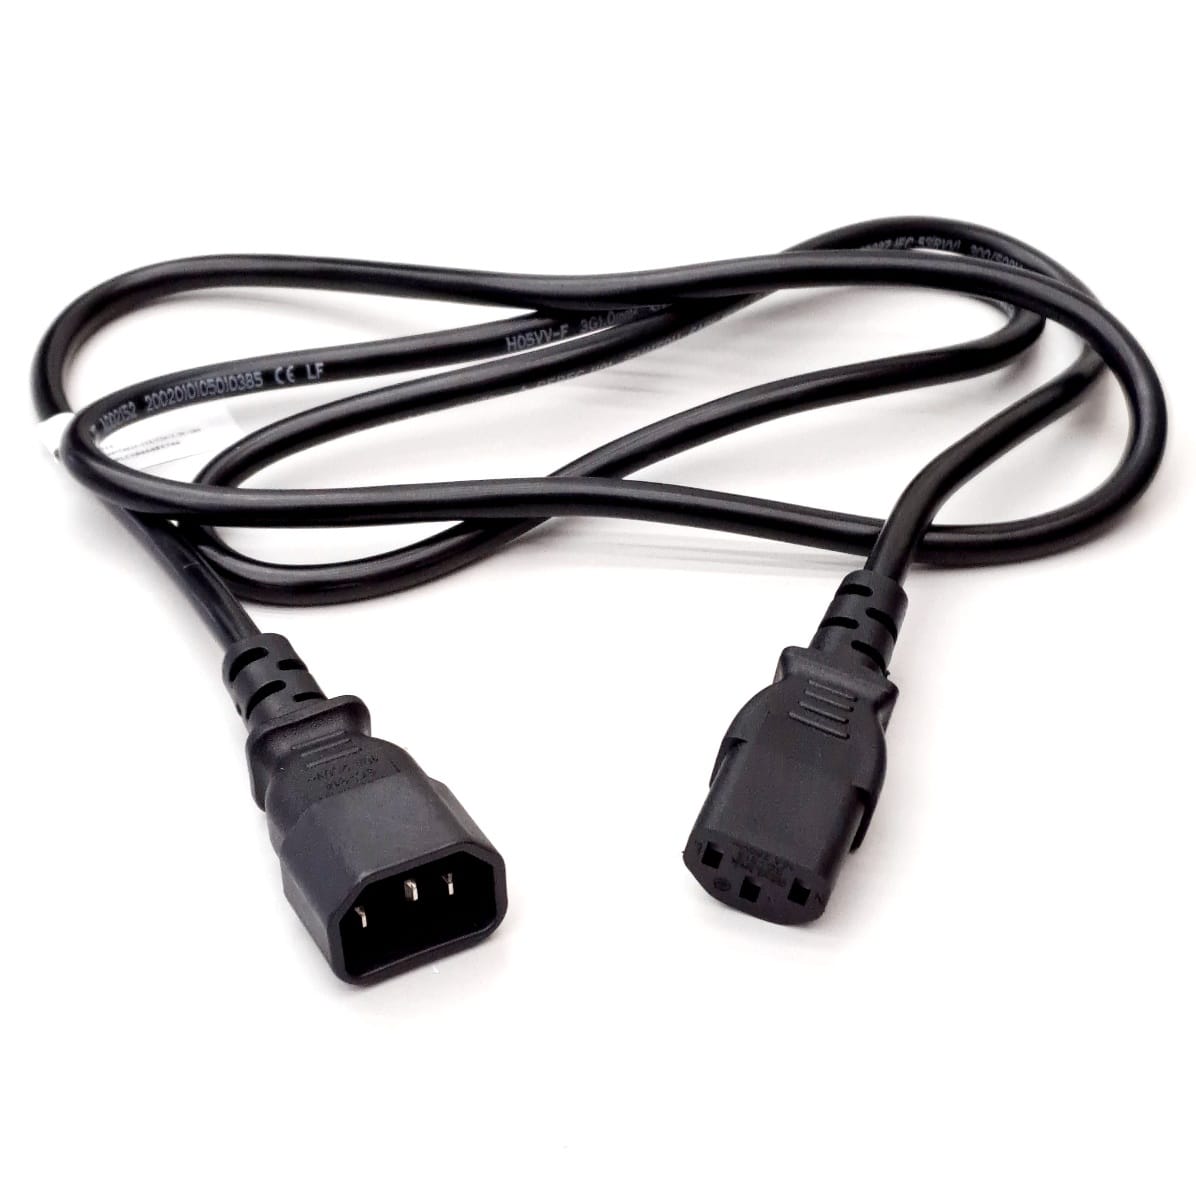 C13 to C14 Extension Cable 1.5m